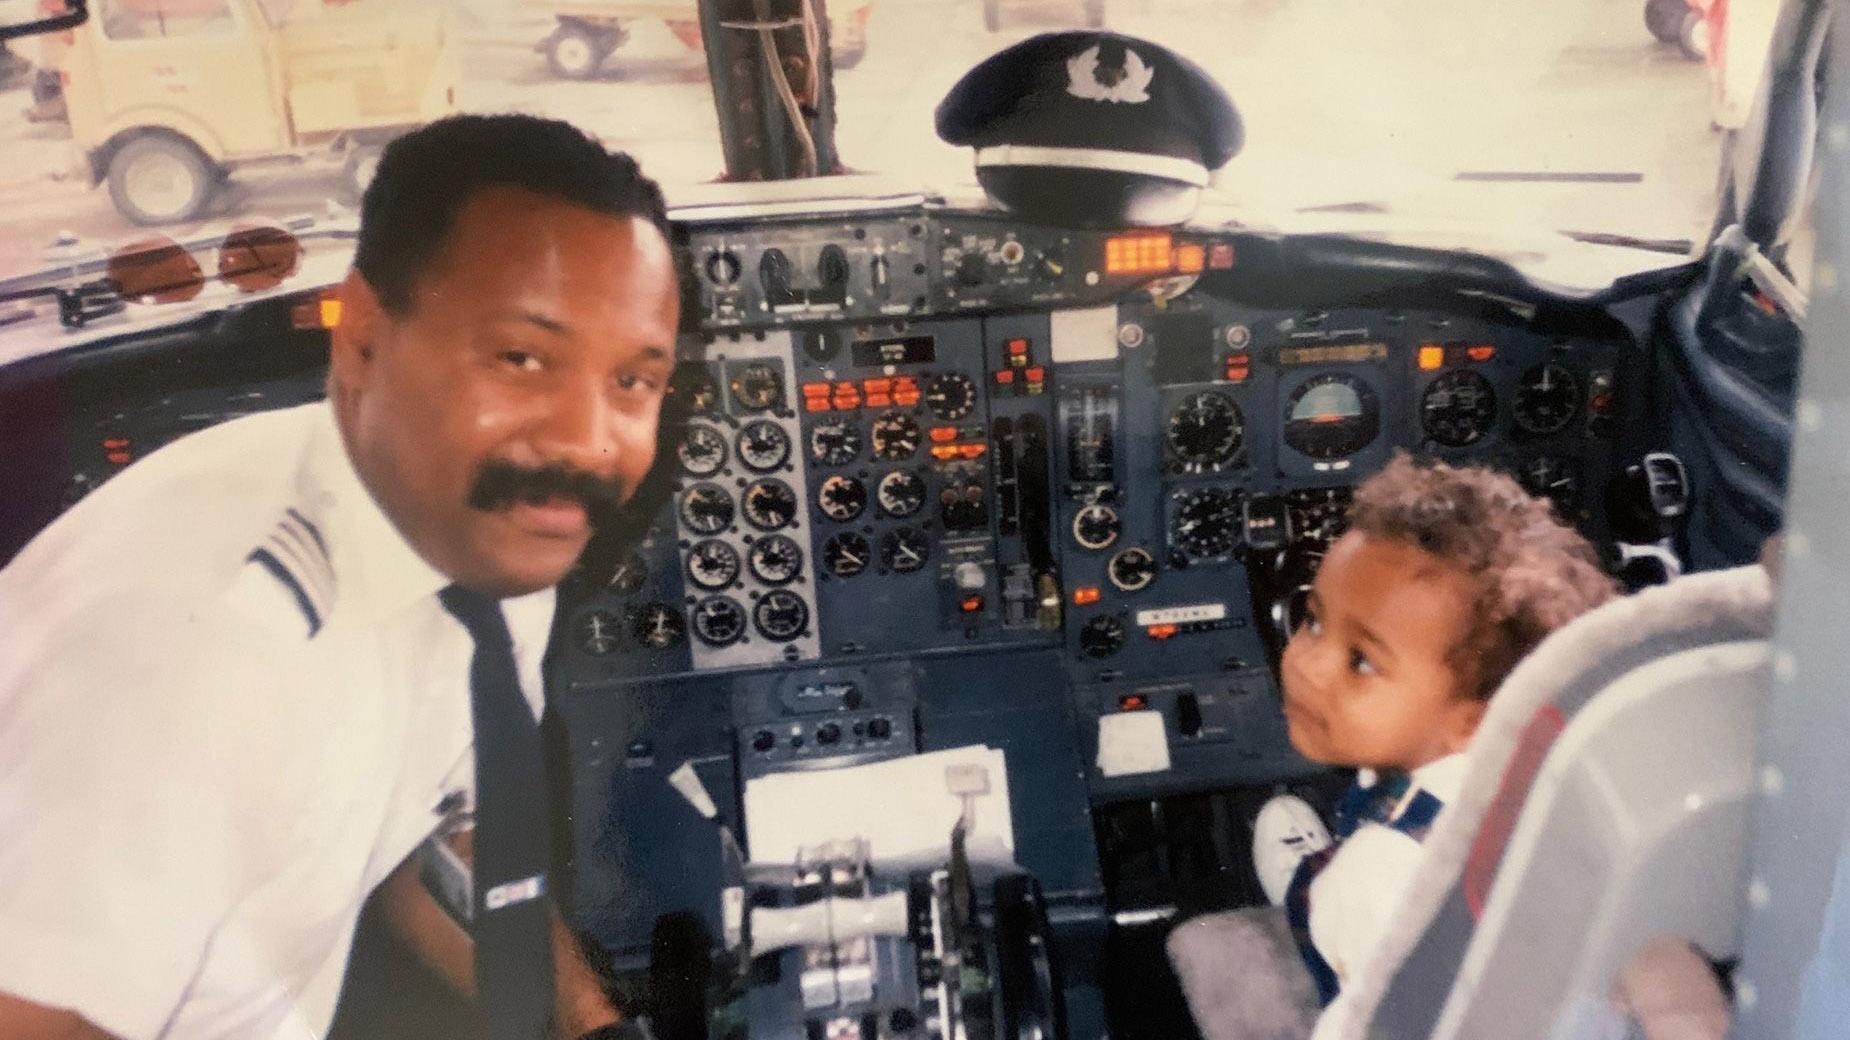 Captain Ruben Flowers and his son, also called Ruben Flowers, posed for this photograph in the airplane flight deck in 1994. They recently recreated the photo, with a twist. (Courtesy of Southwest Airlines)